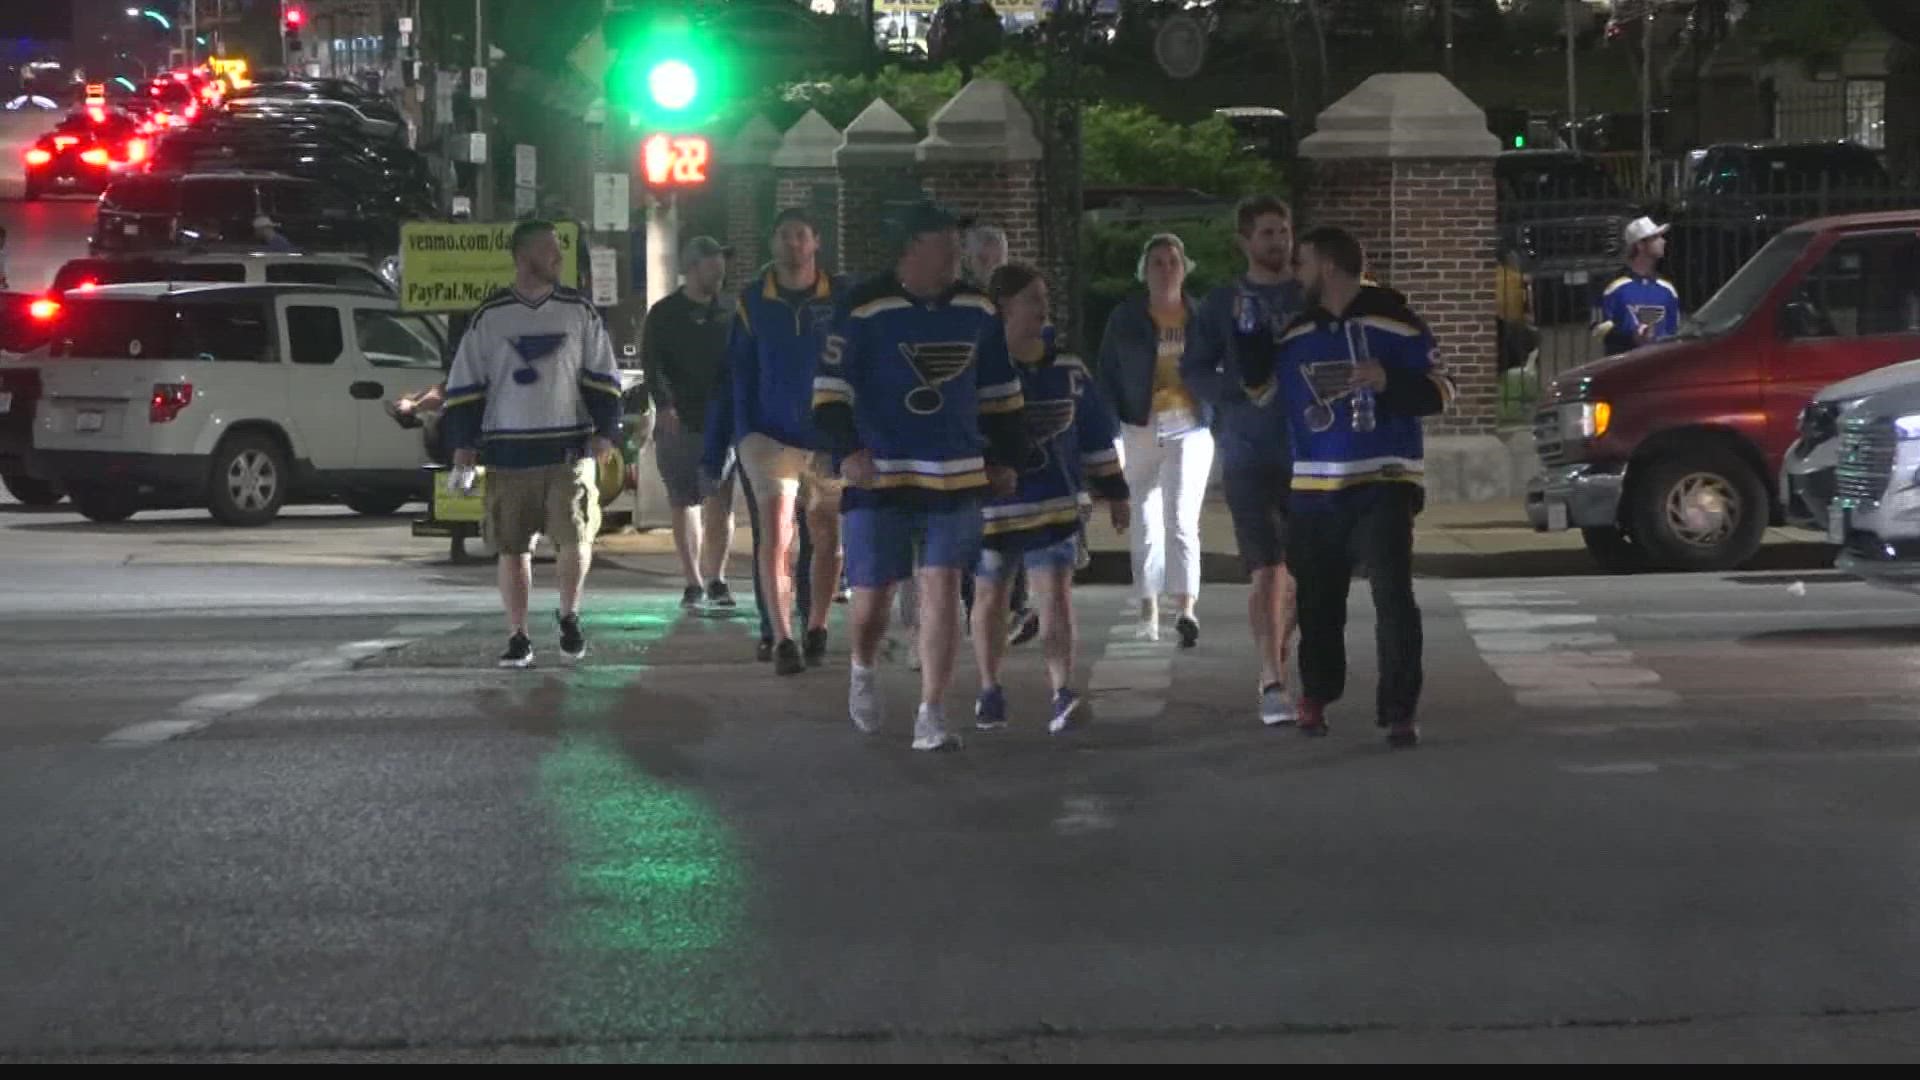 The blues won game 6 against the Minnesota Wild in St. Louis Thursday night, and fans couldn't wait to celebrate the victory.